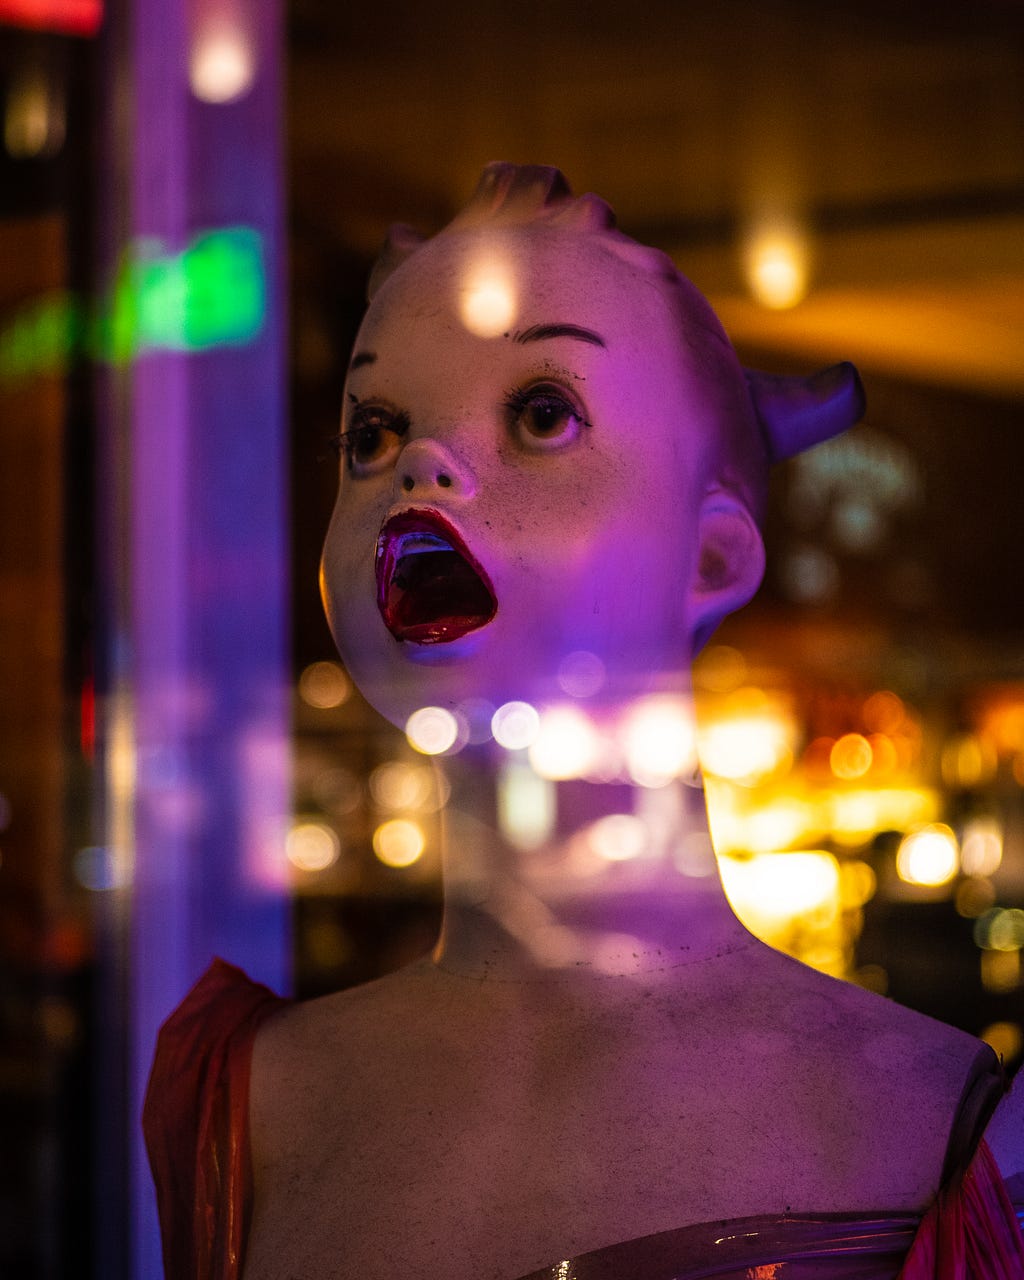 Mannequin with a stunned expression, staring up at lights